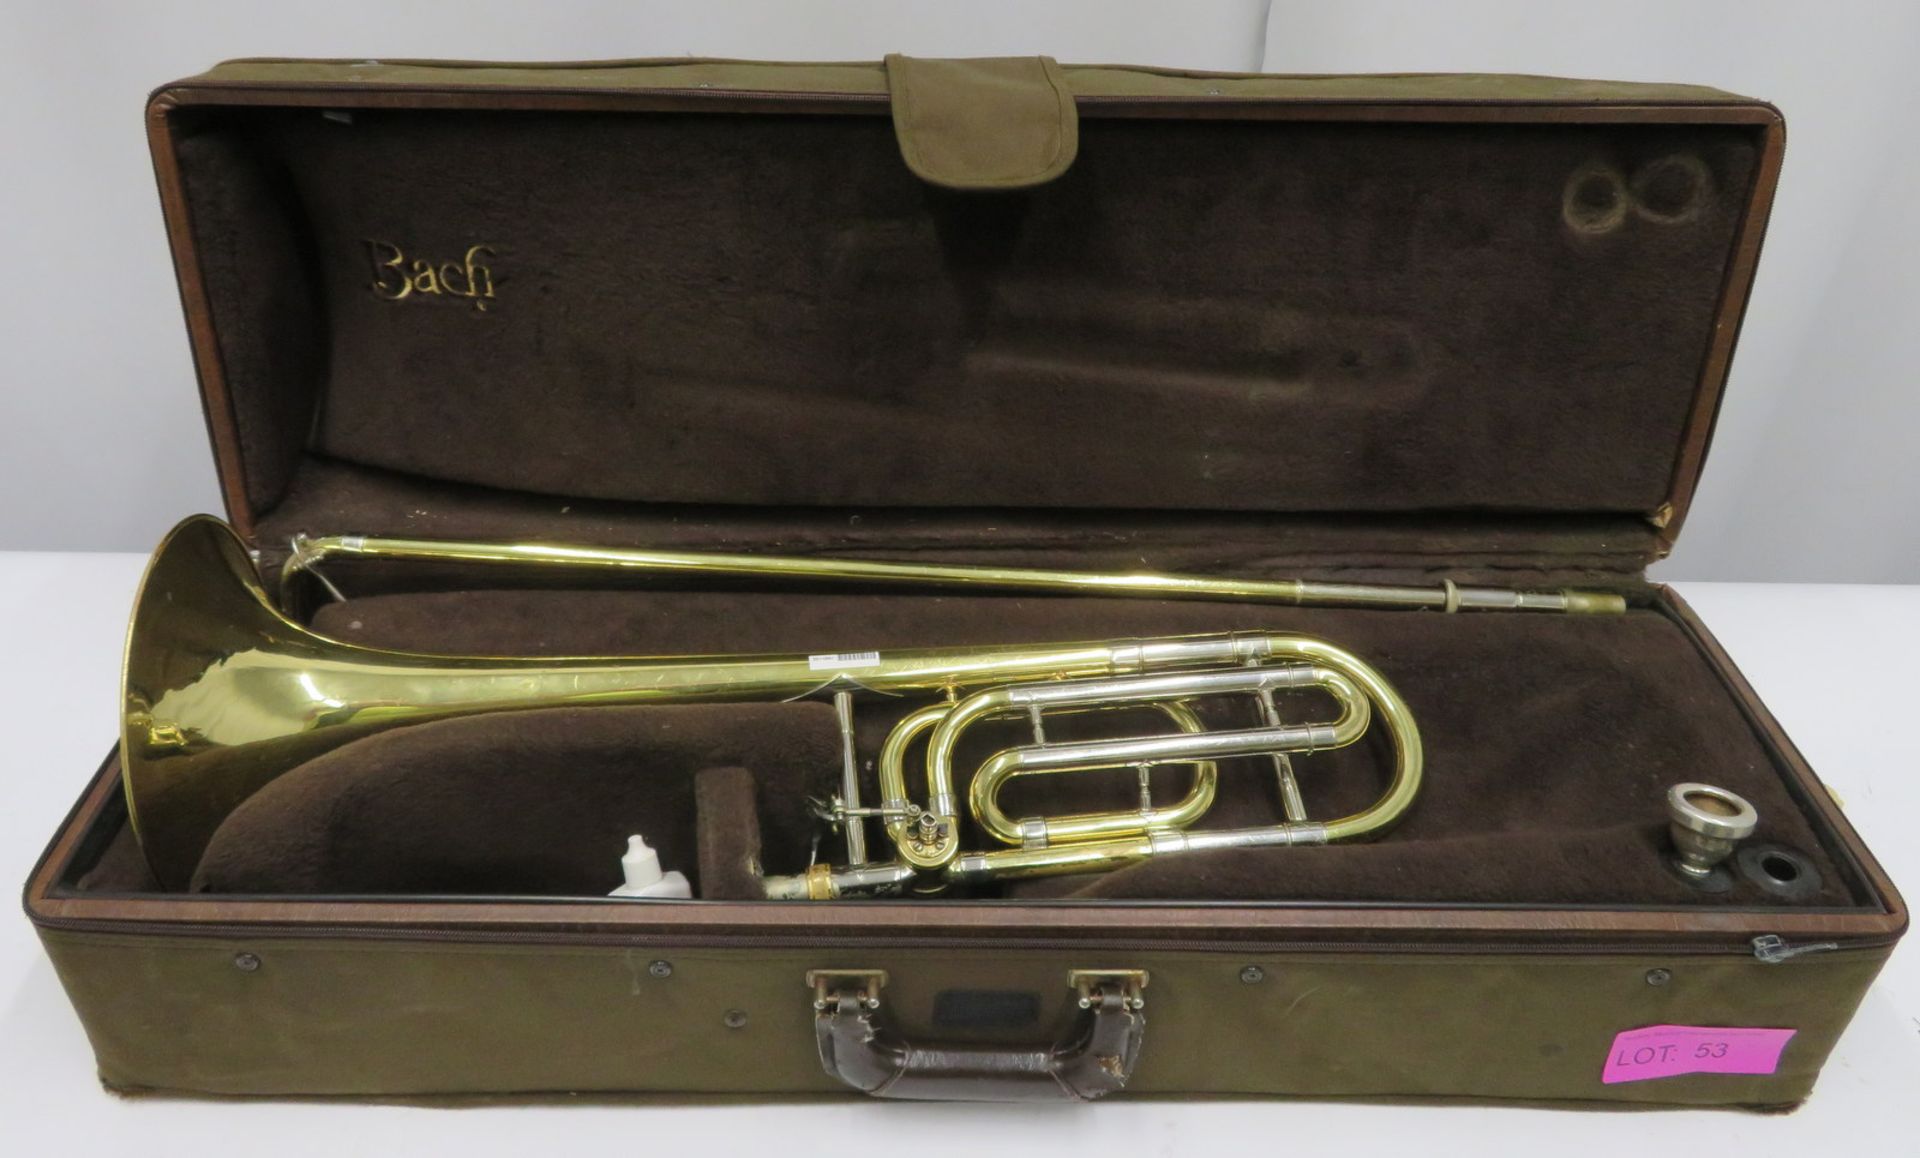 Bach Stradivarius model 42 trombone with case. Serial number: 98216.